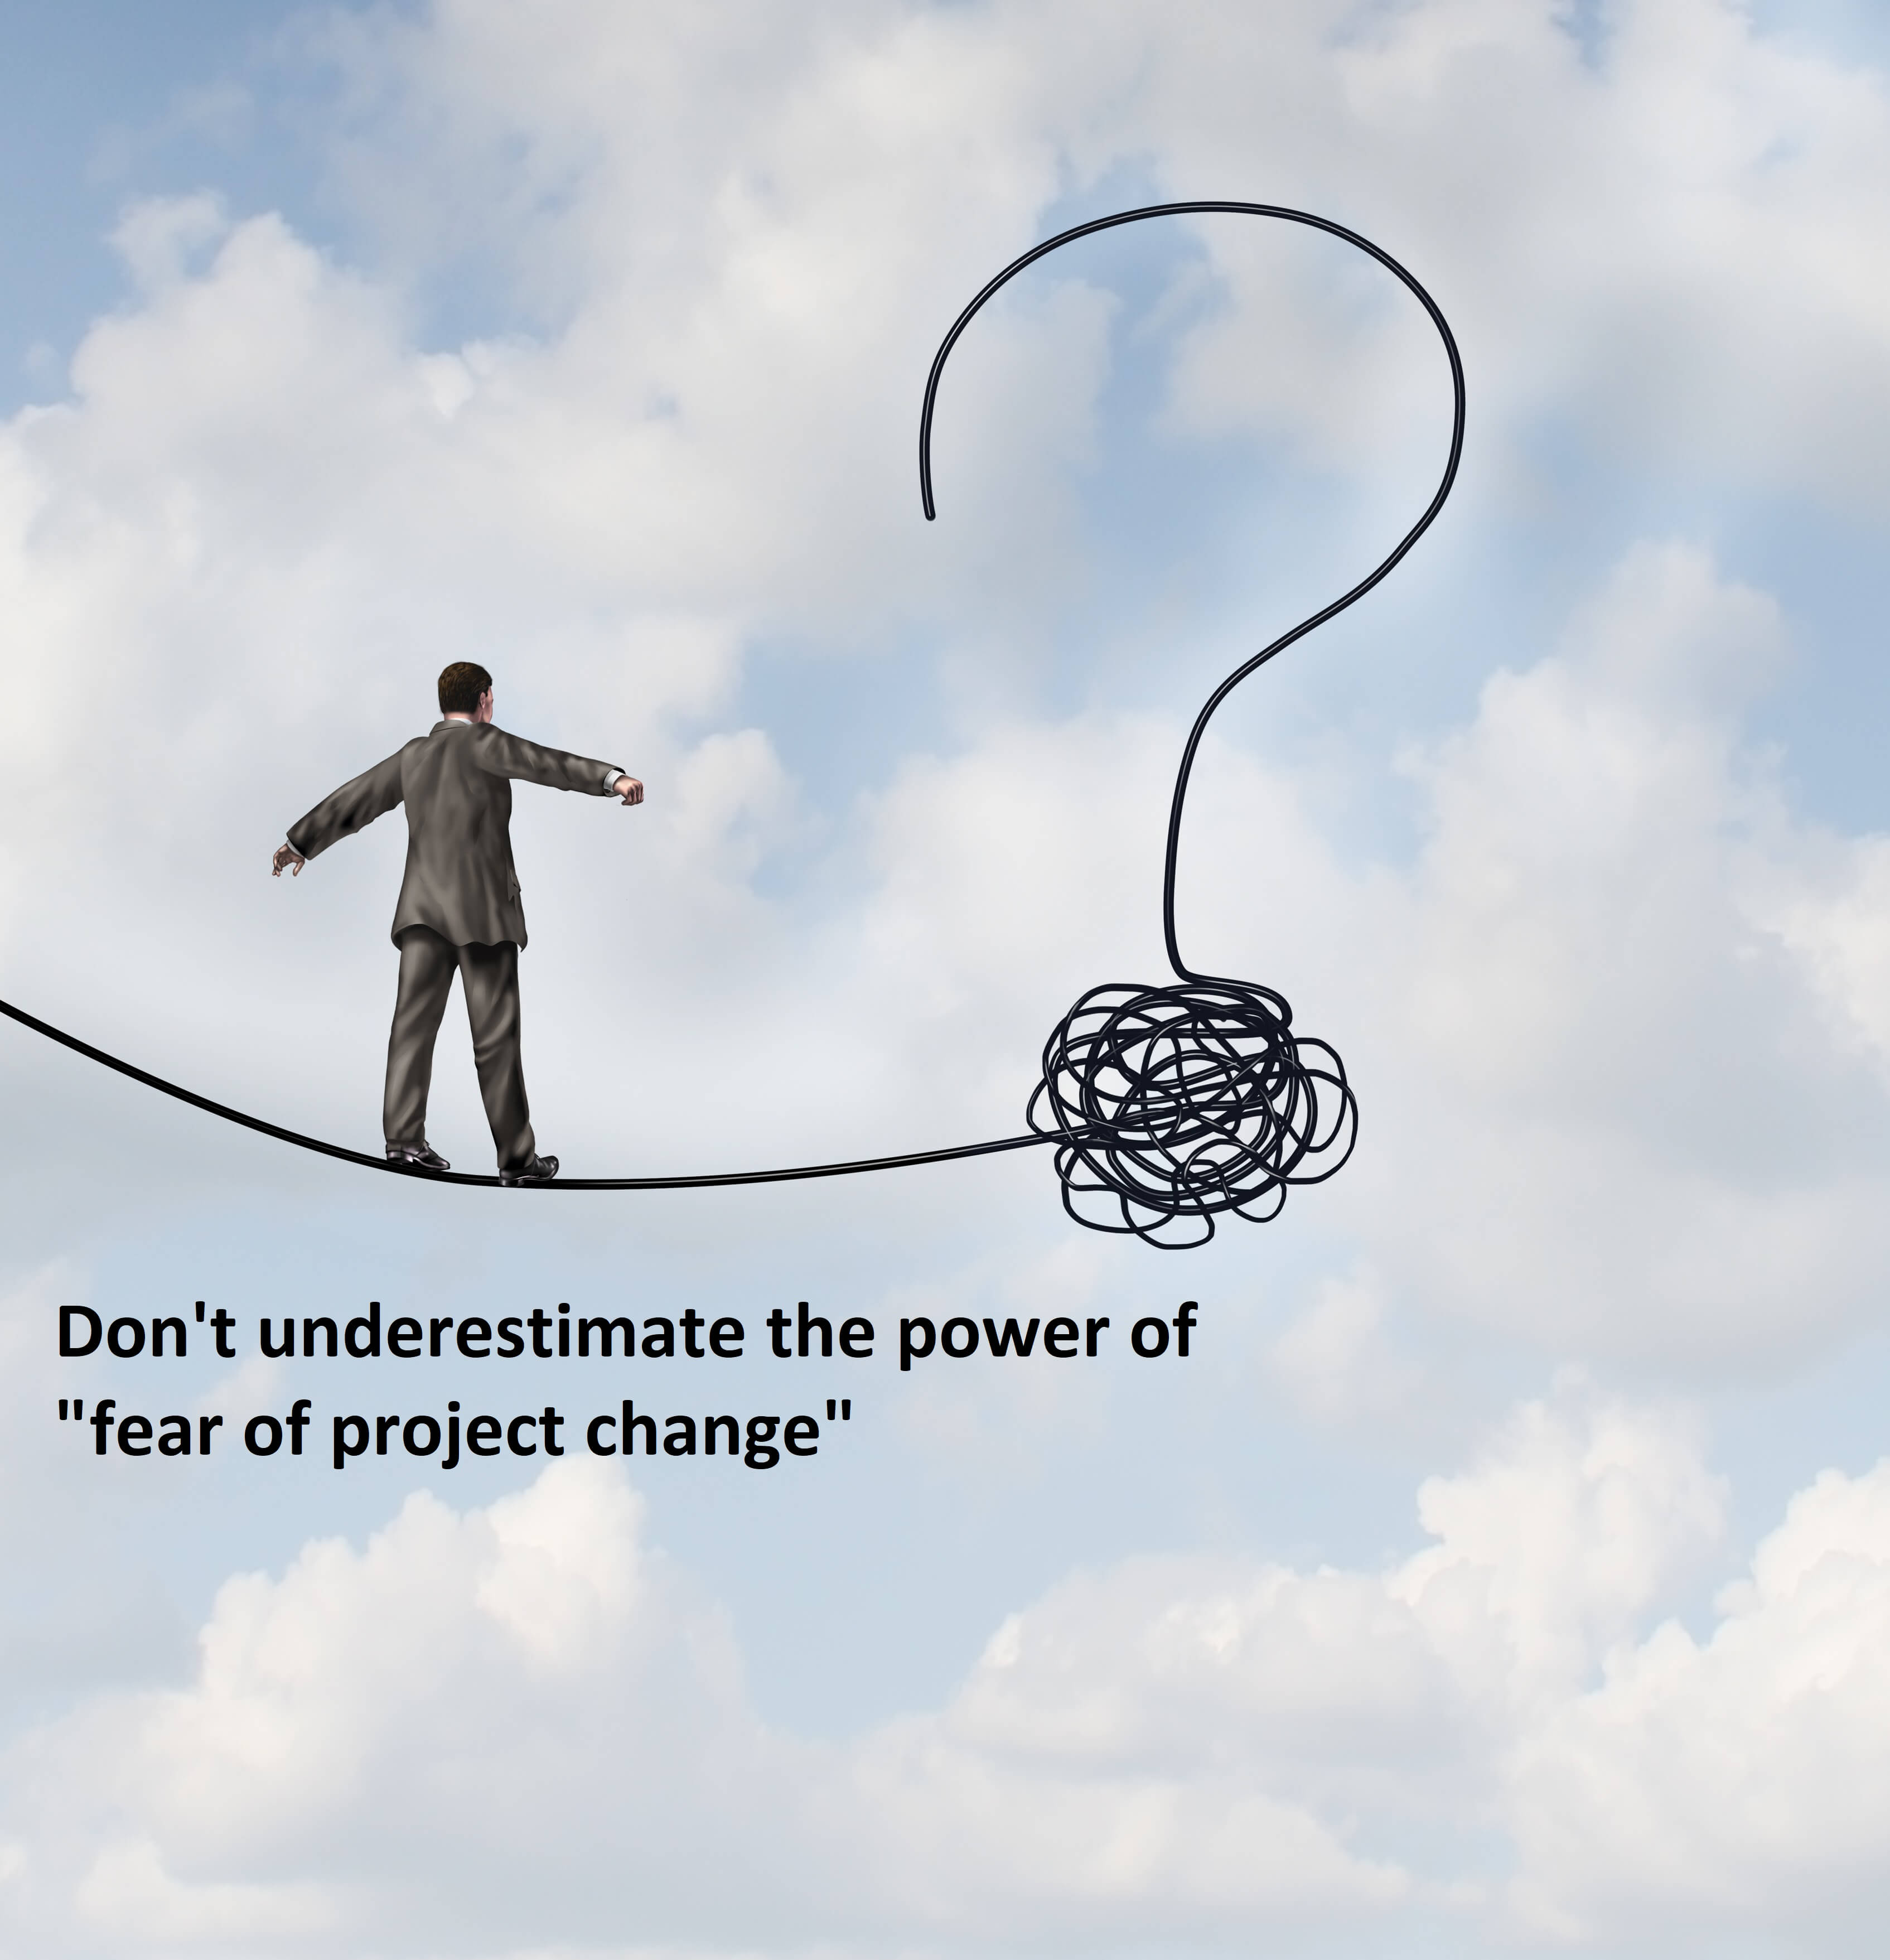 Why the PMO and Project team must not underestimate the fear of change!